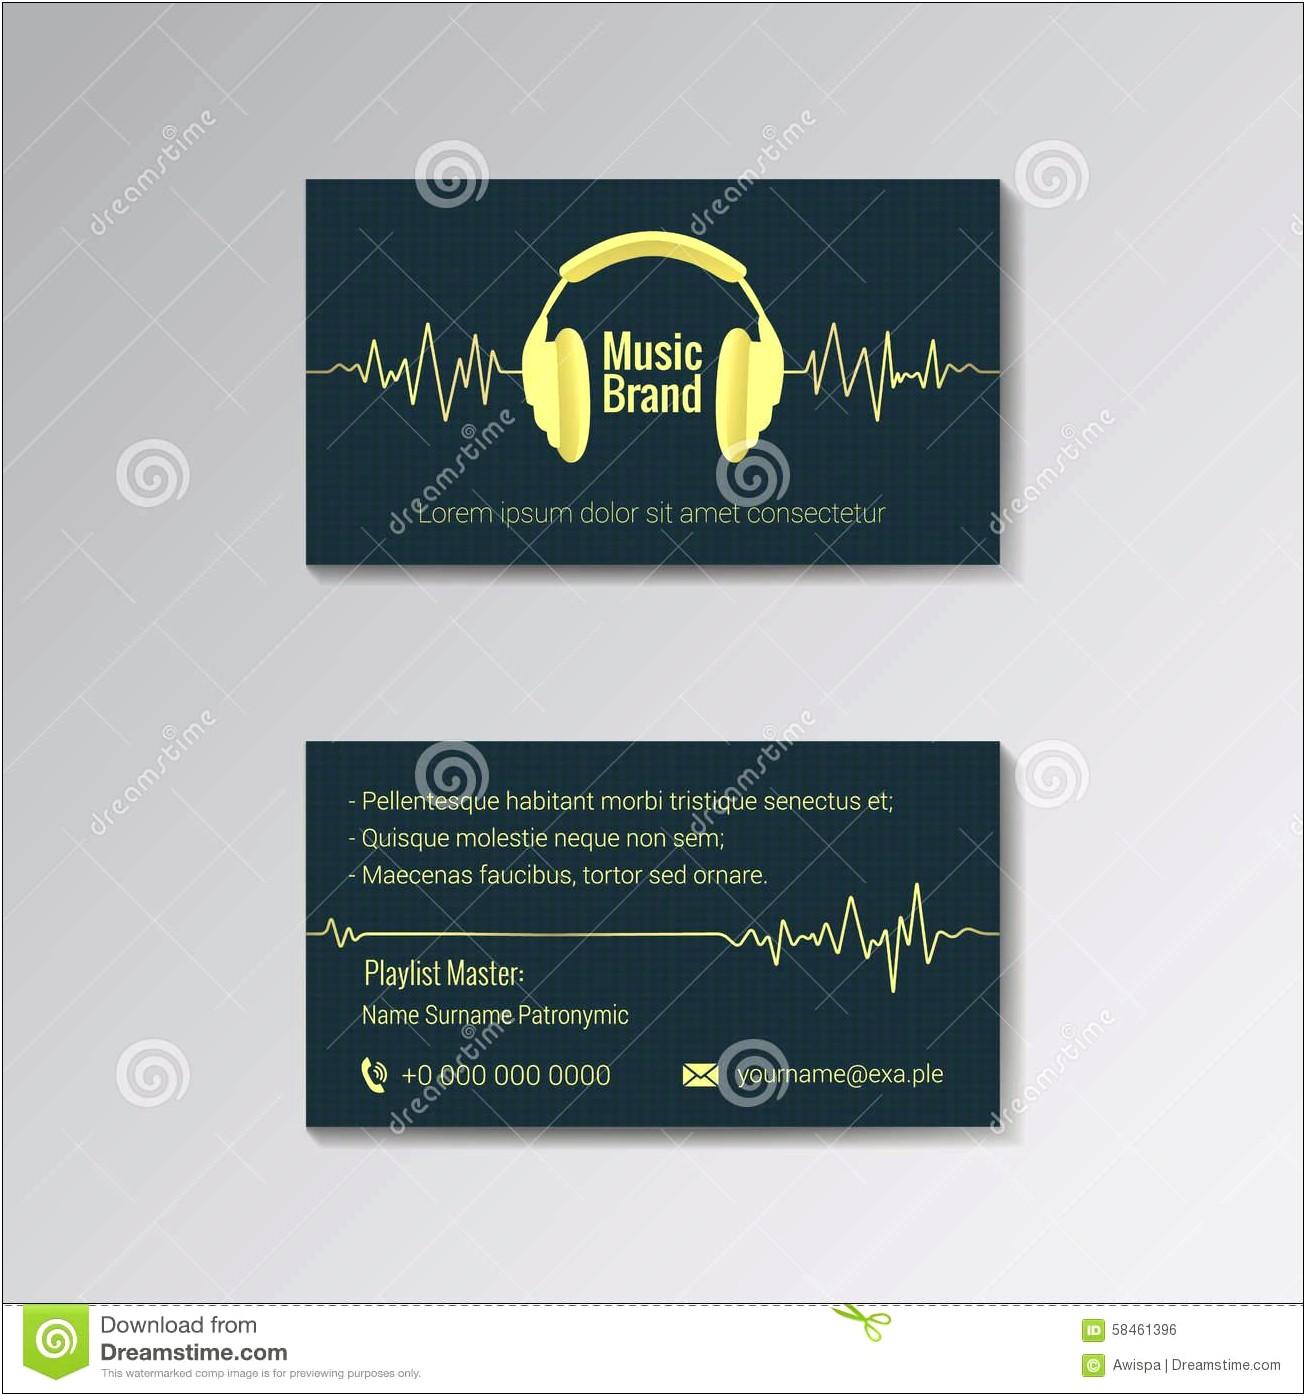 Dj Business Cards Templates Free Vector Download